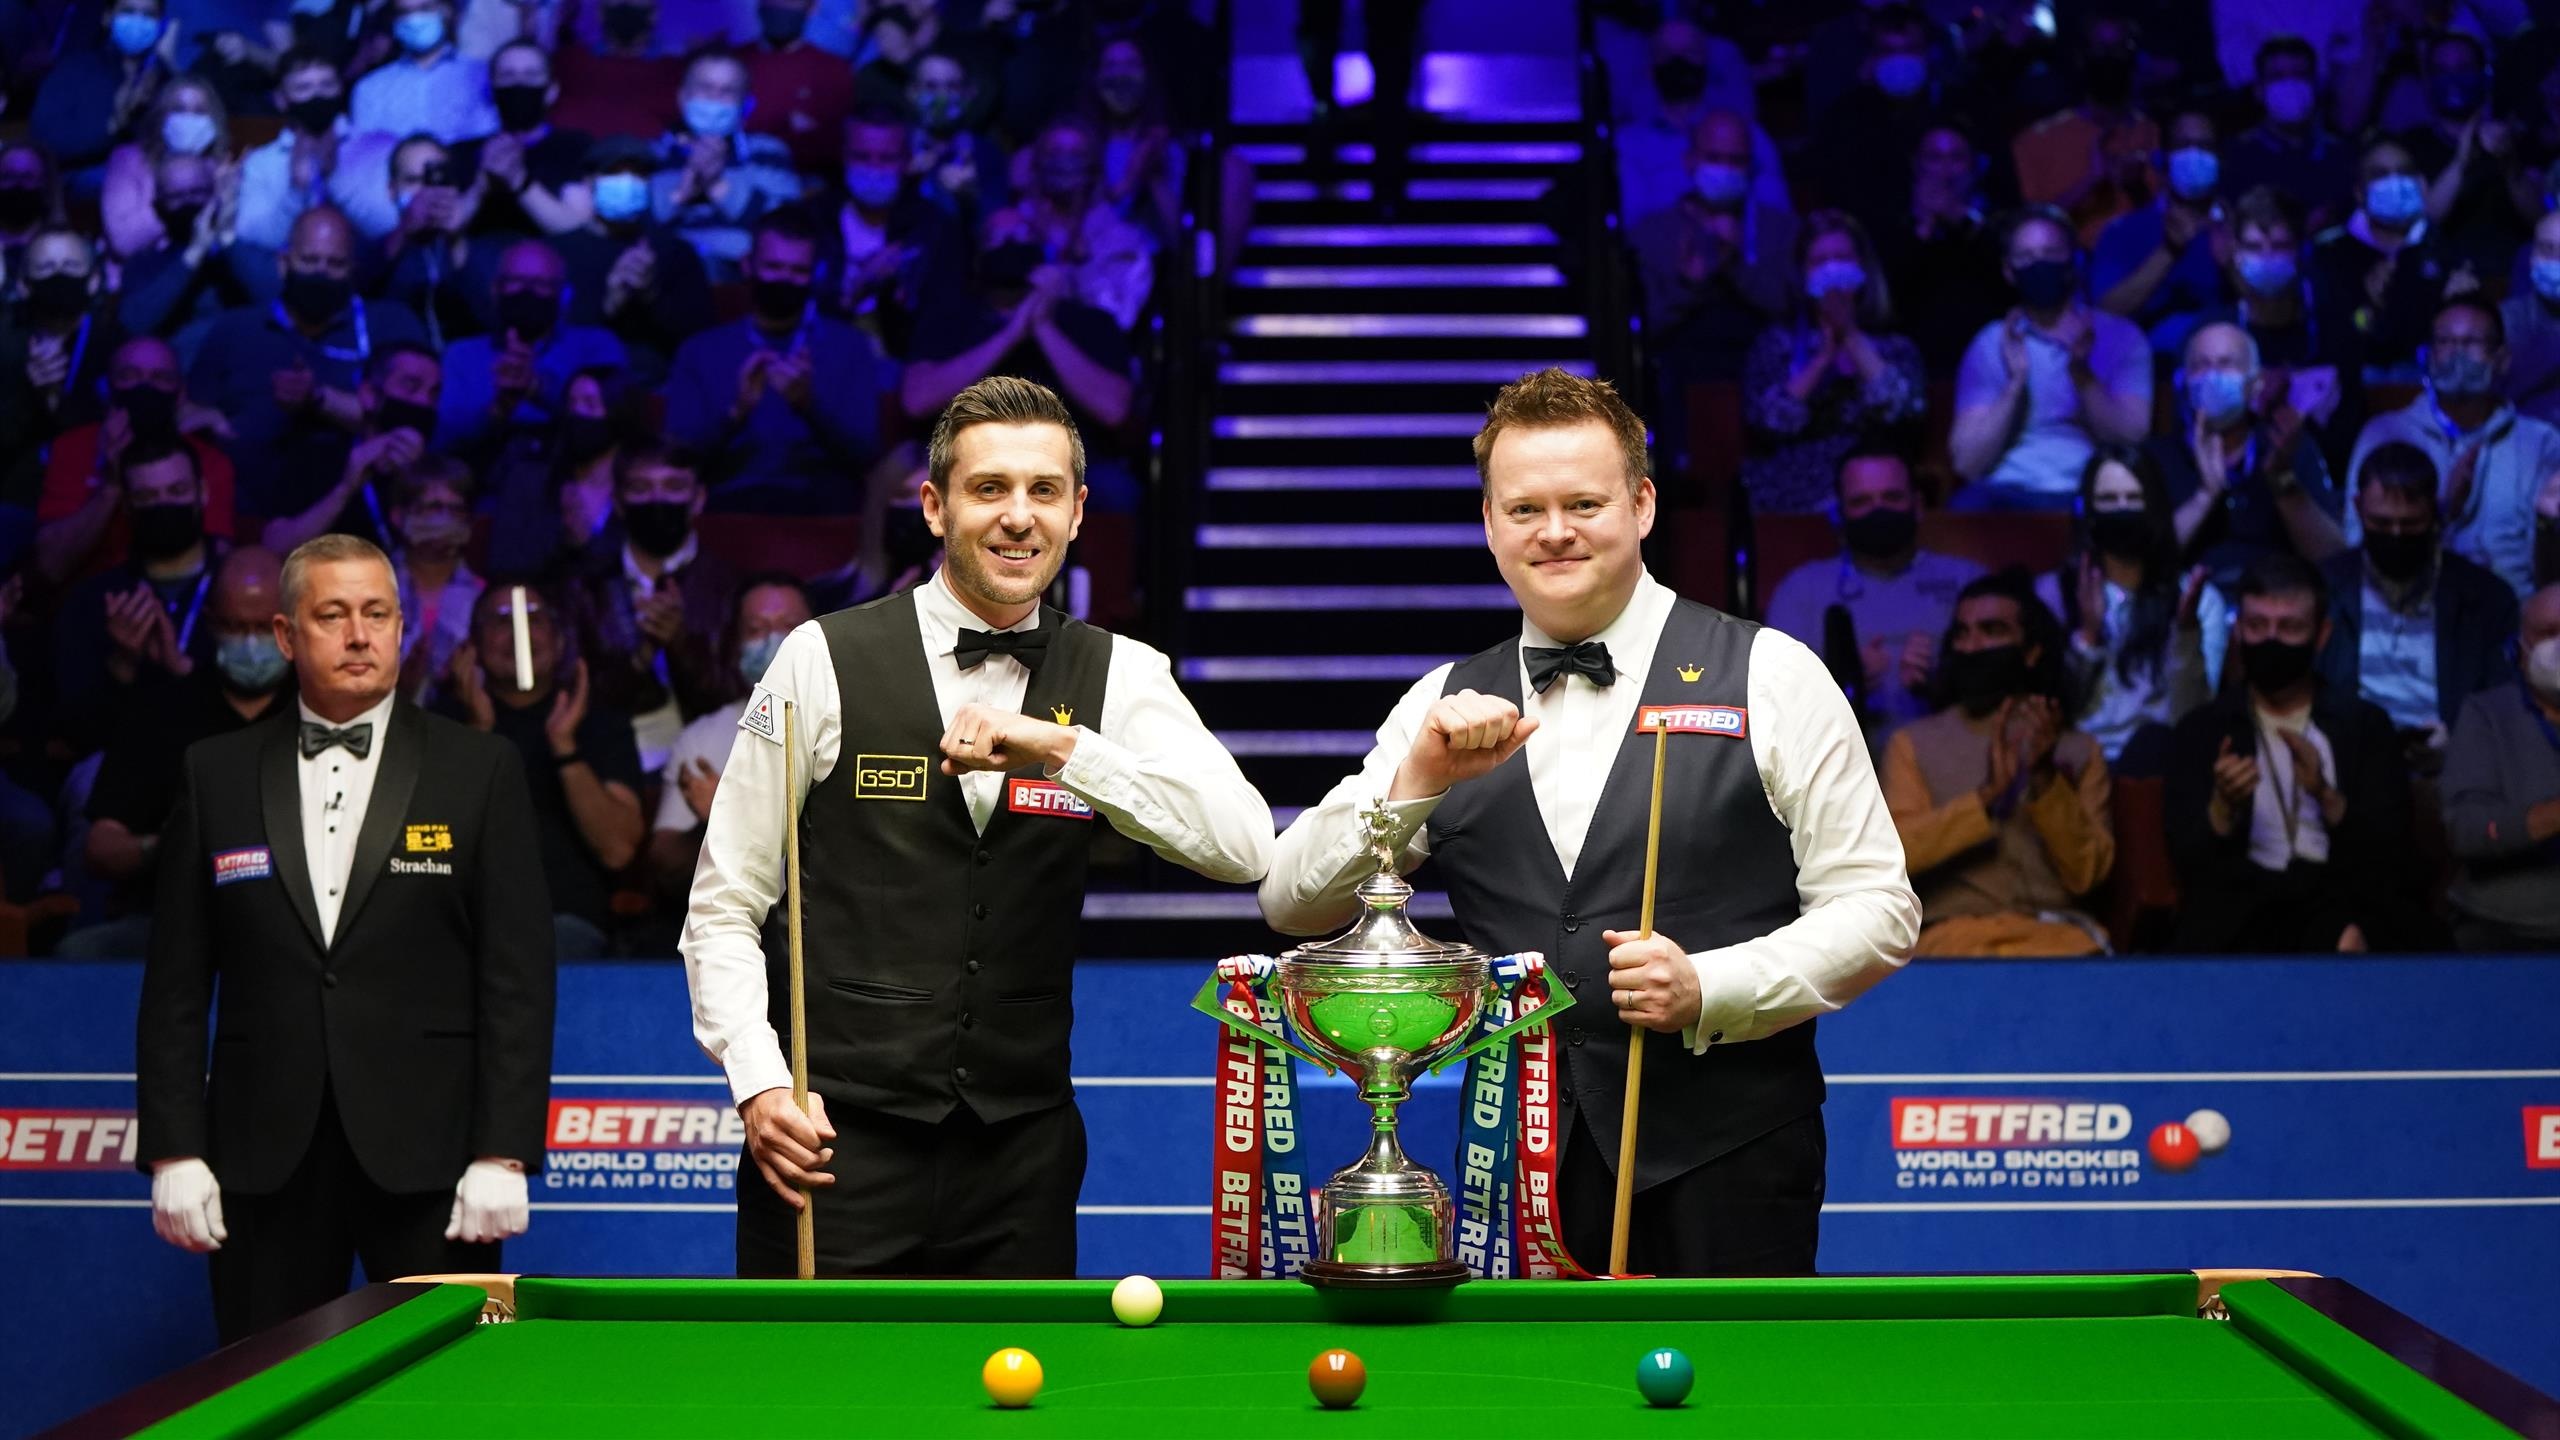 Snooker: The 2022 Betfred World Snooker Championship, A competitive cue sport. 2560x1440 HD Background.